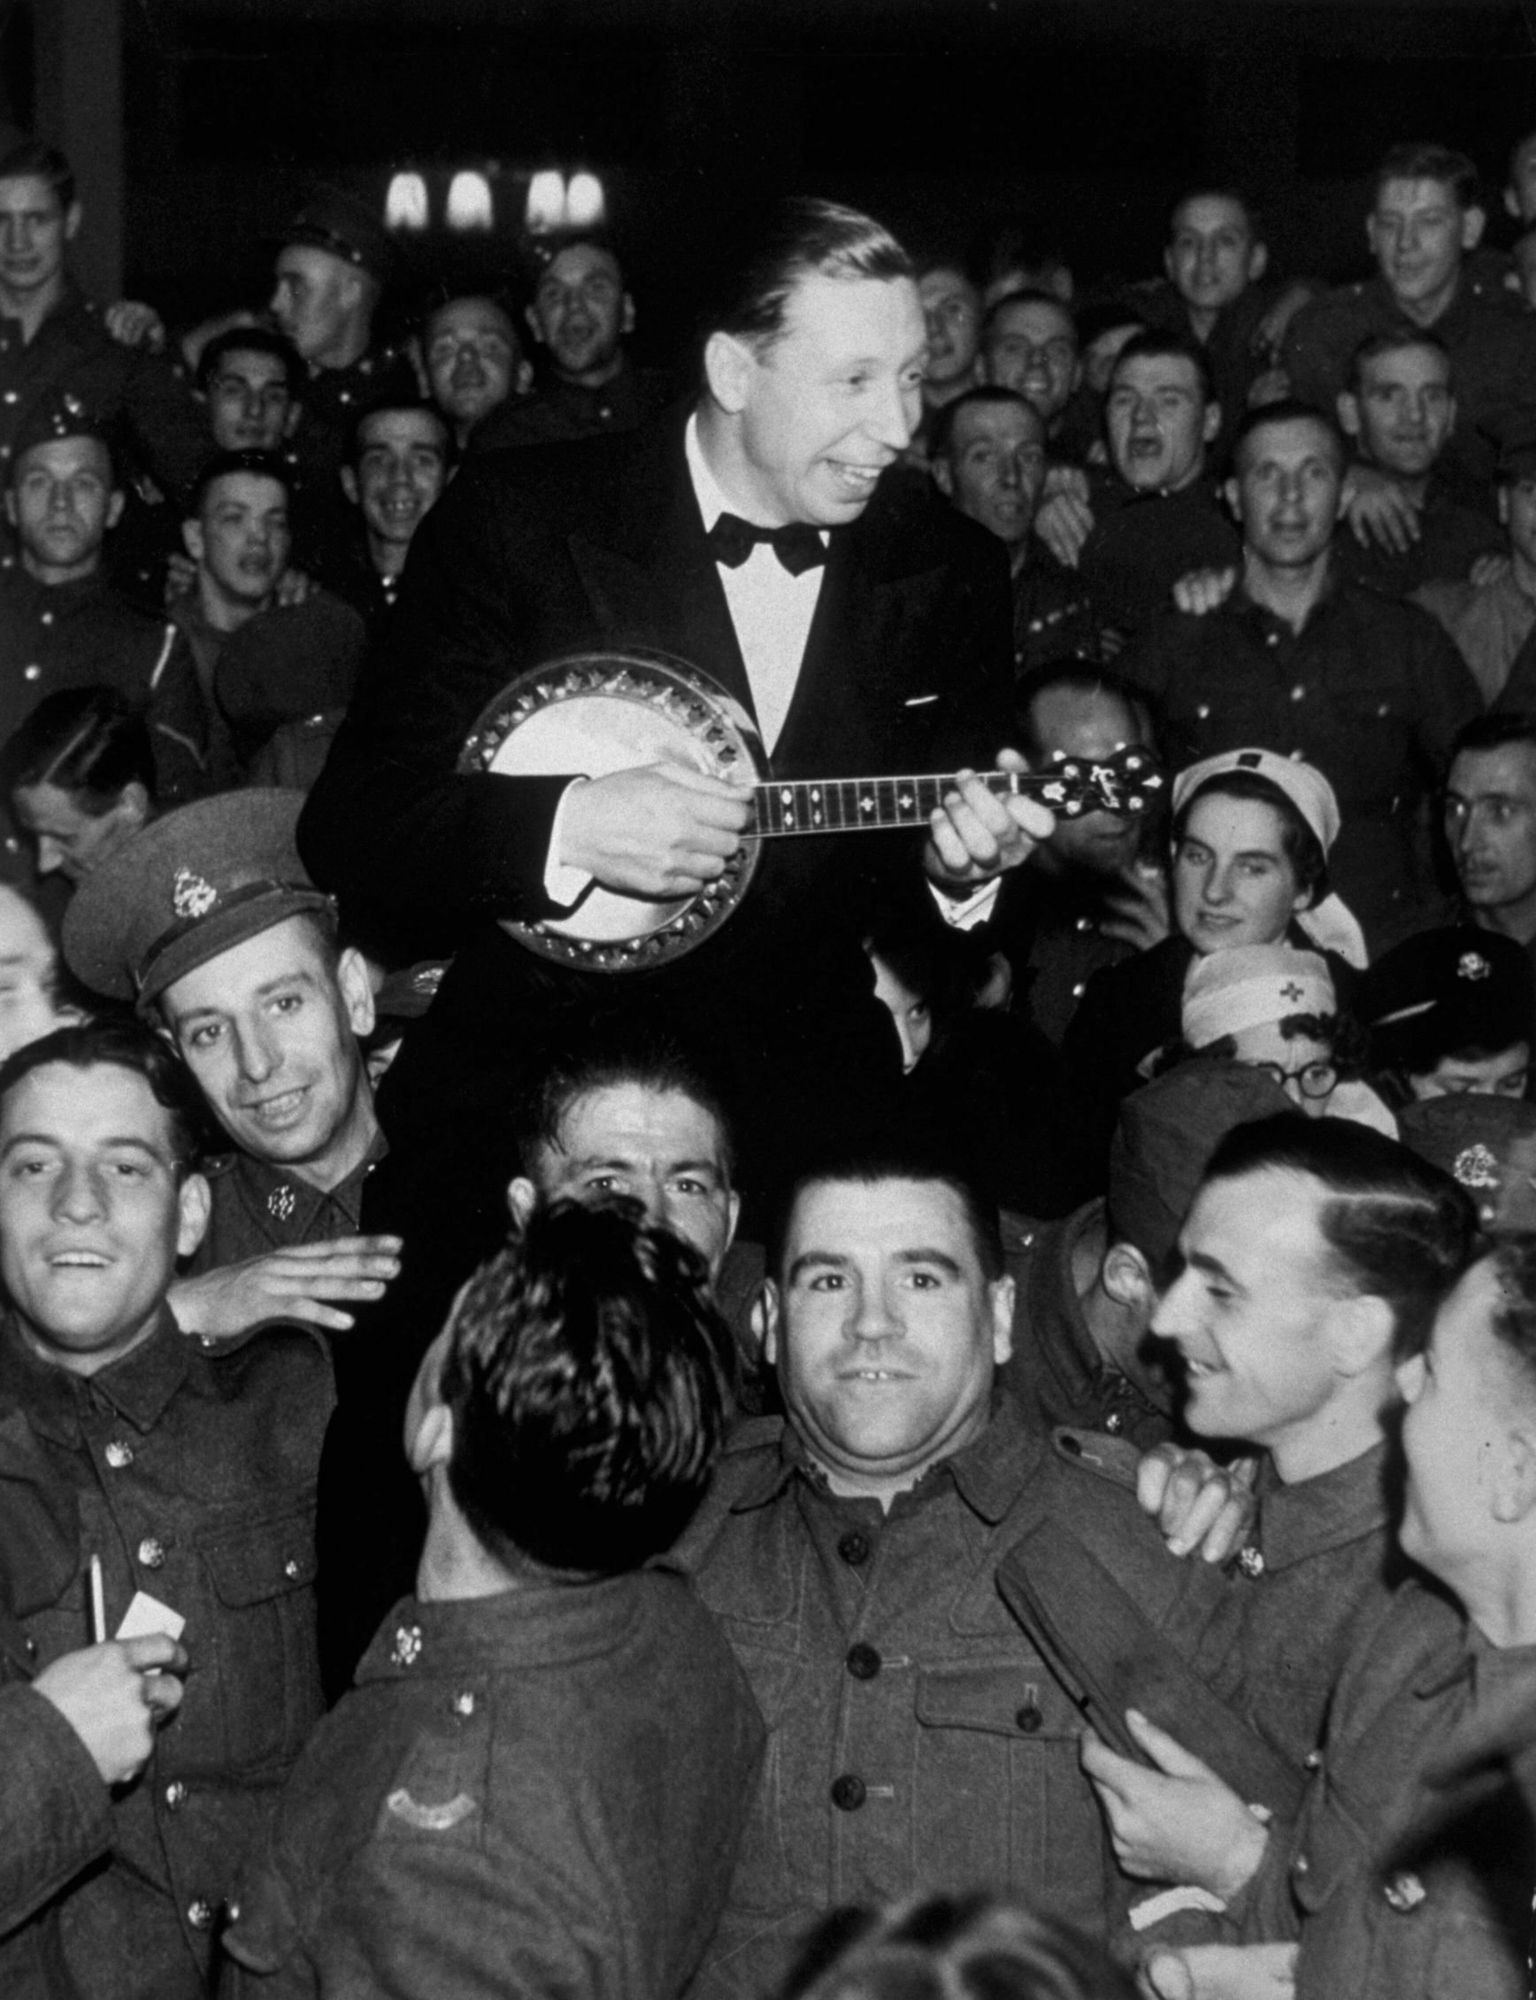 George Formby entertaining troops in 1939